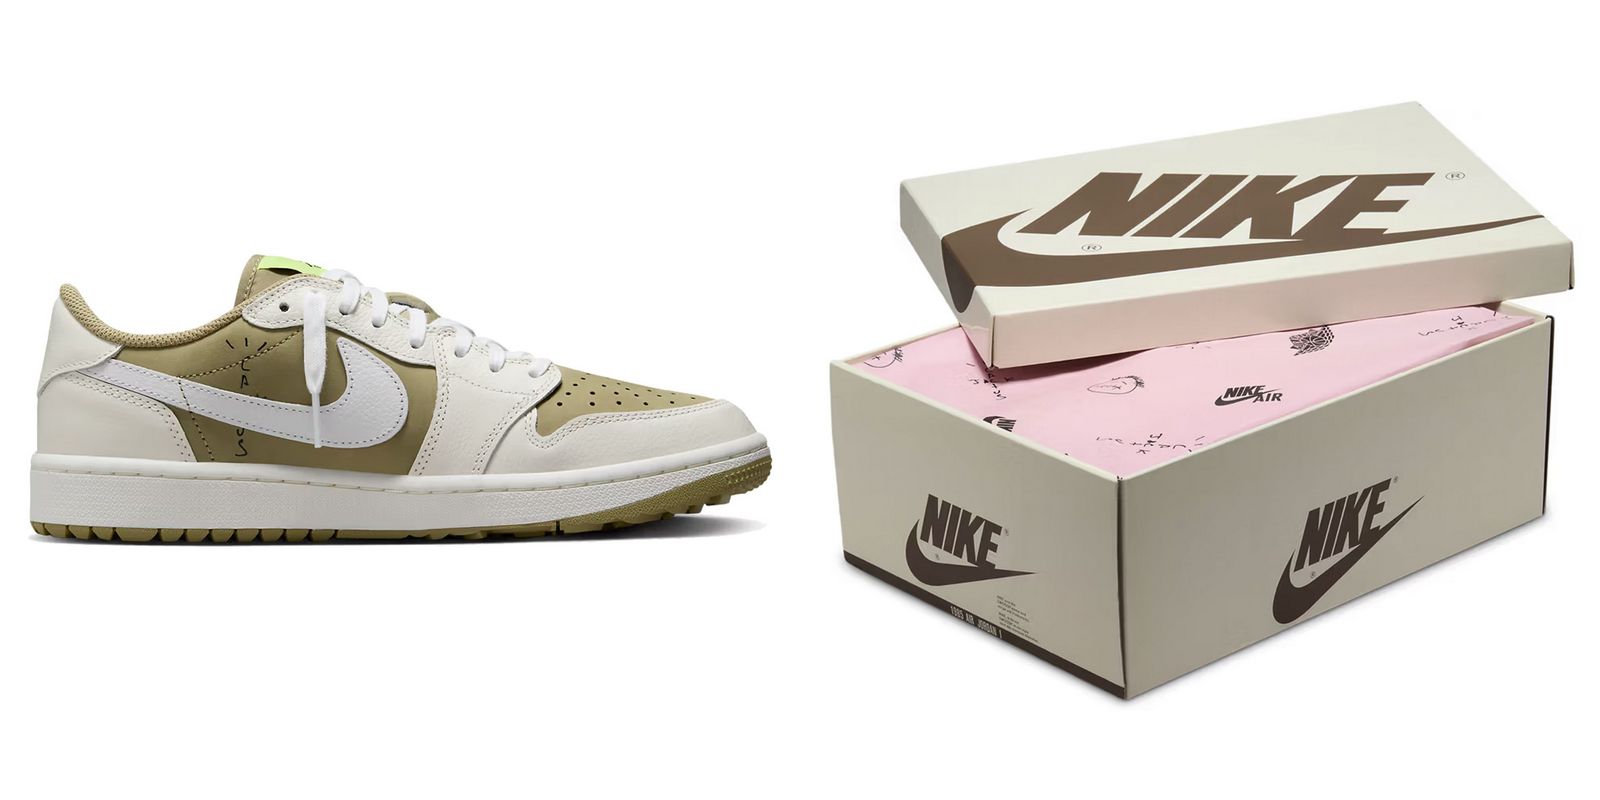 Louis Vuitton x Nike Air Force 1 Collection Fetches $25.3 Million at  Auction